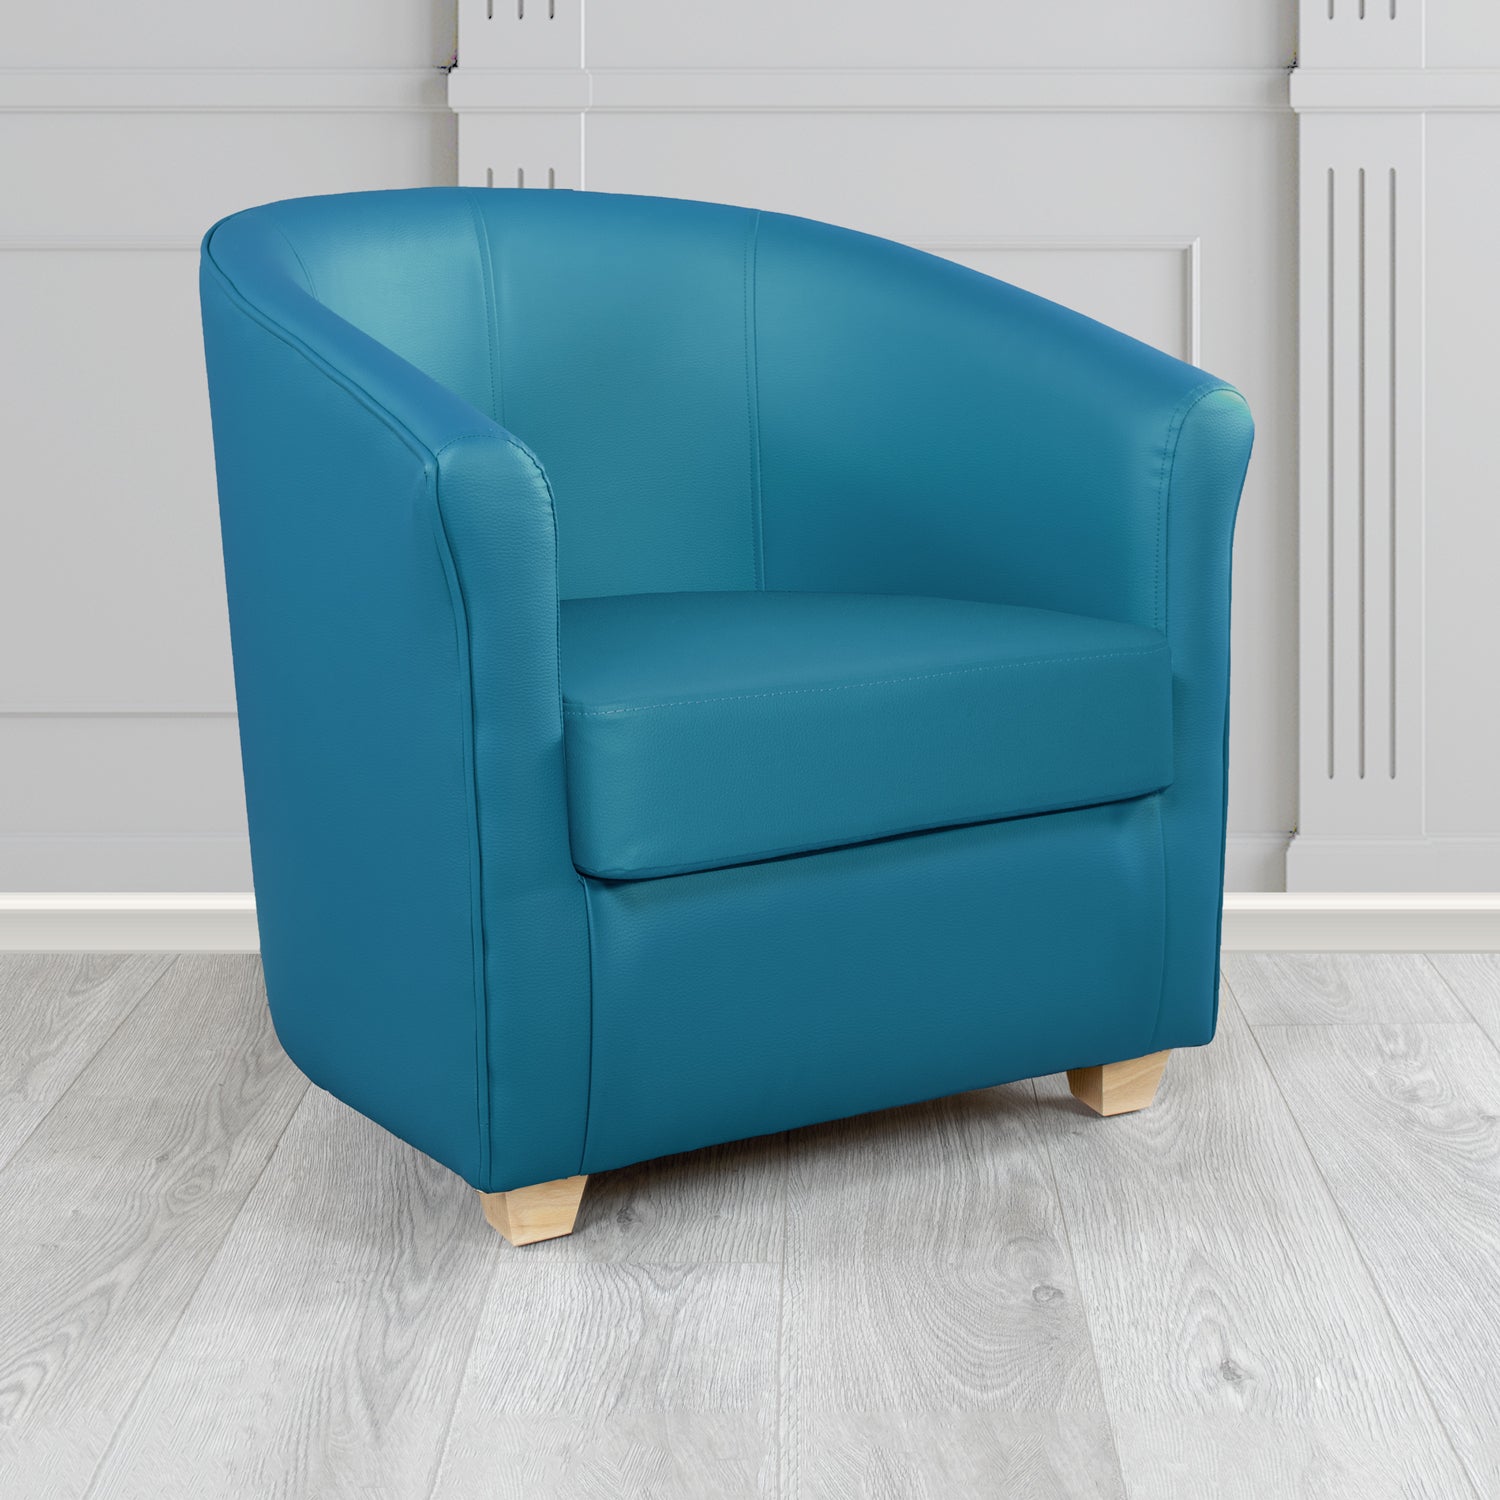 Antimicrobial Tub Chairs (Covid-19 resistant)